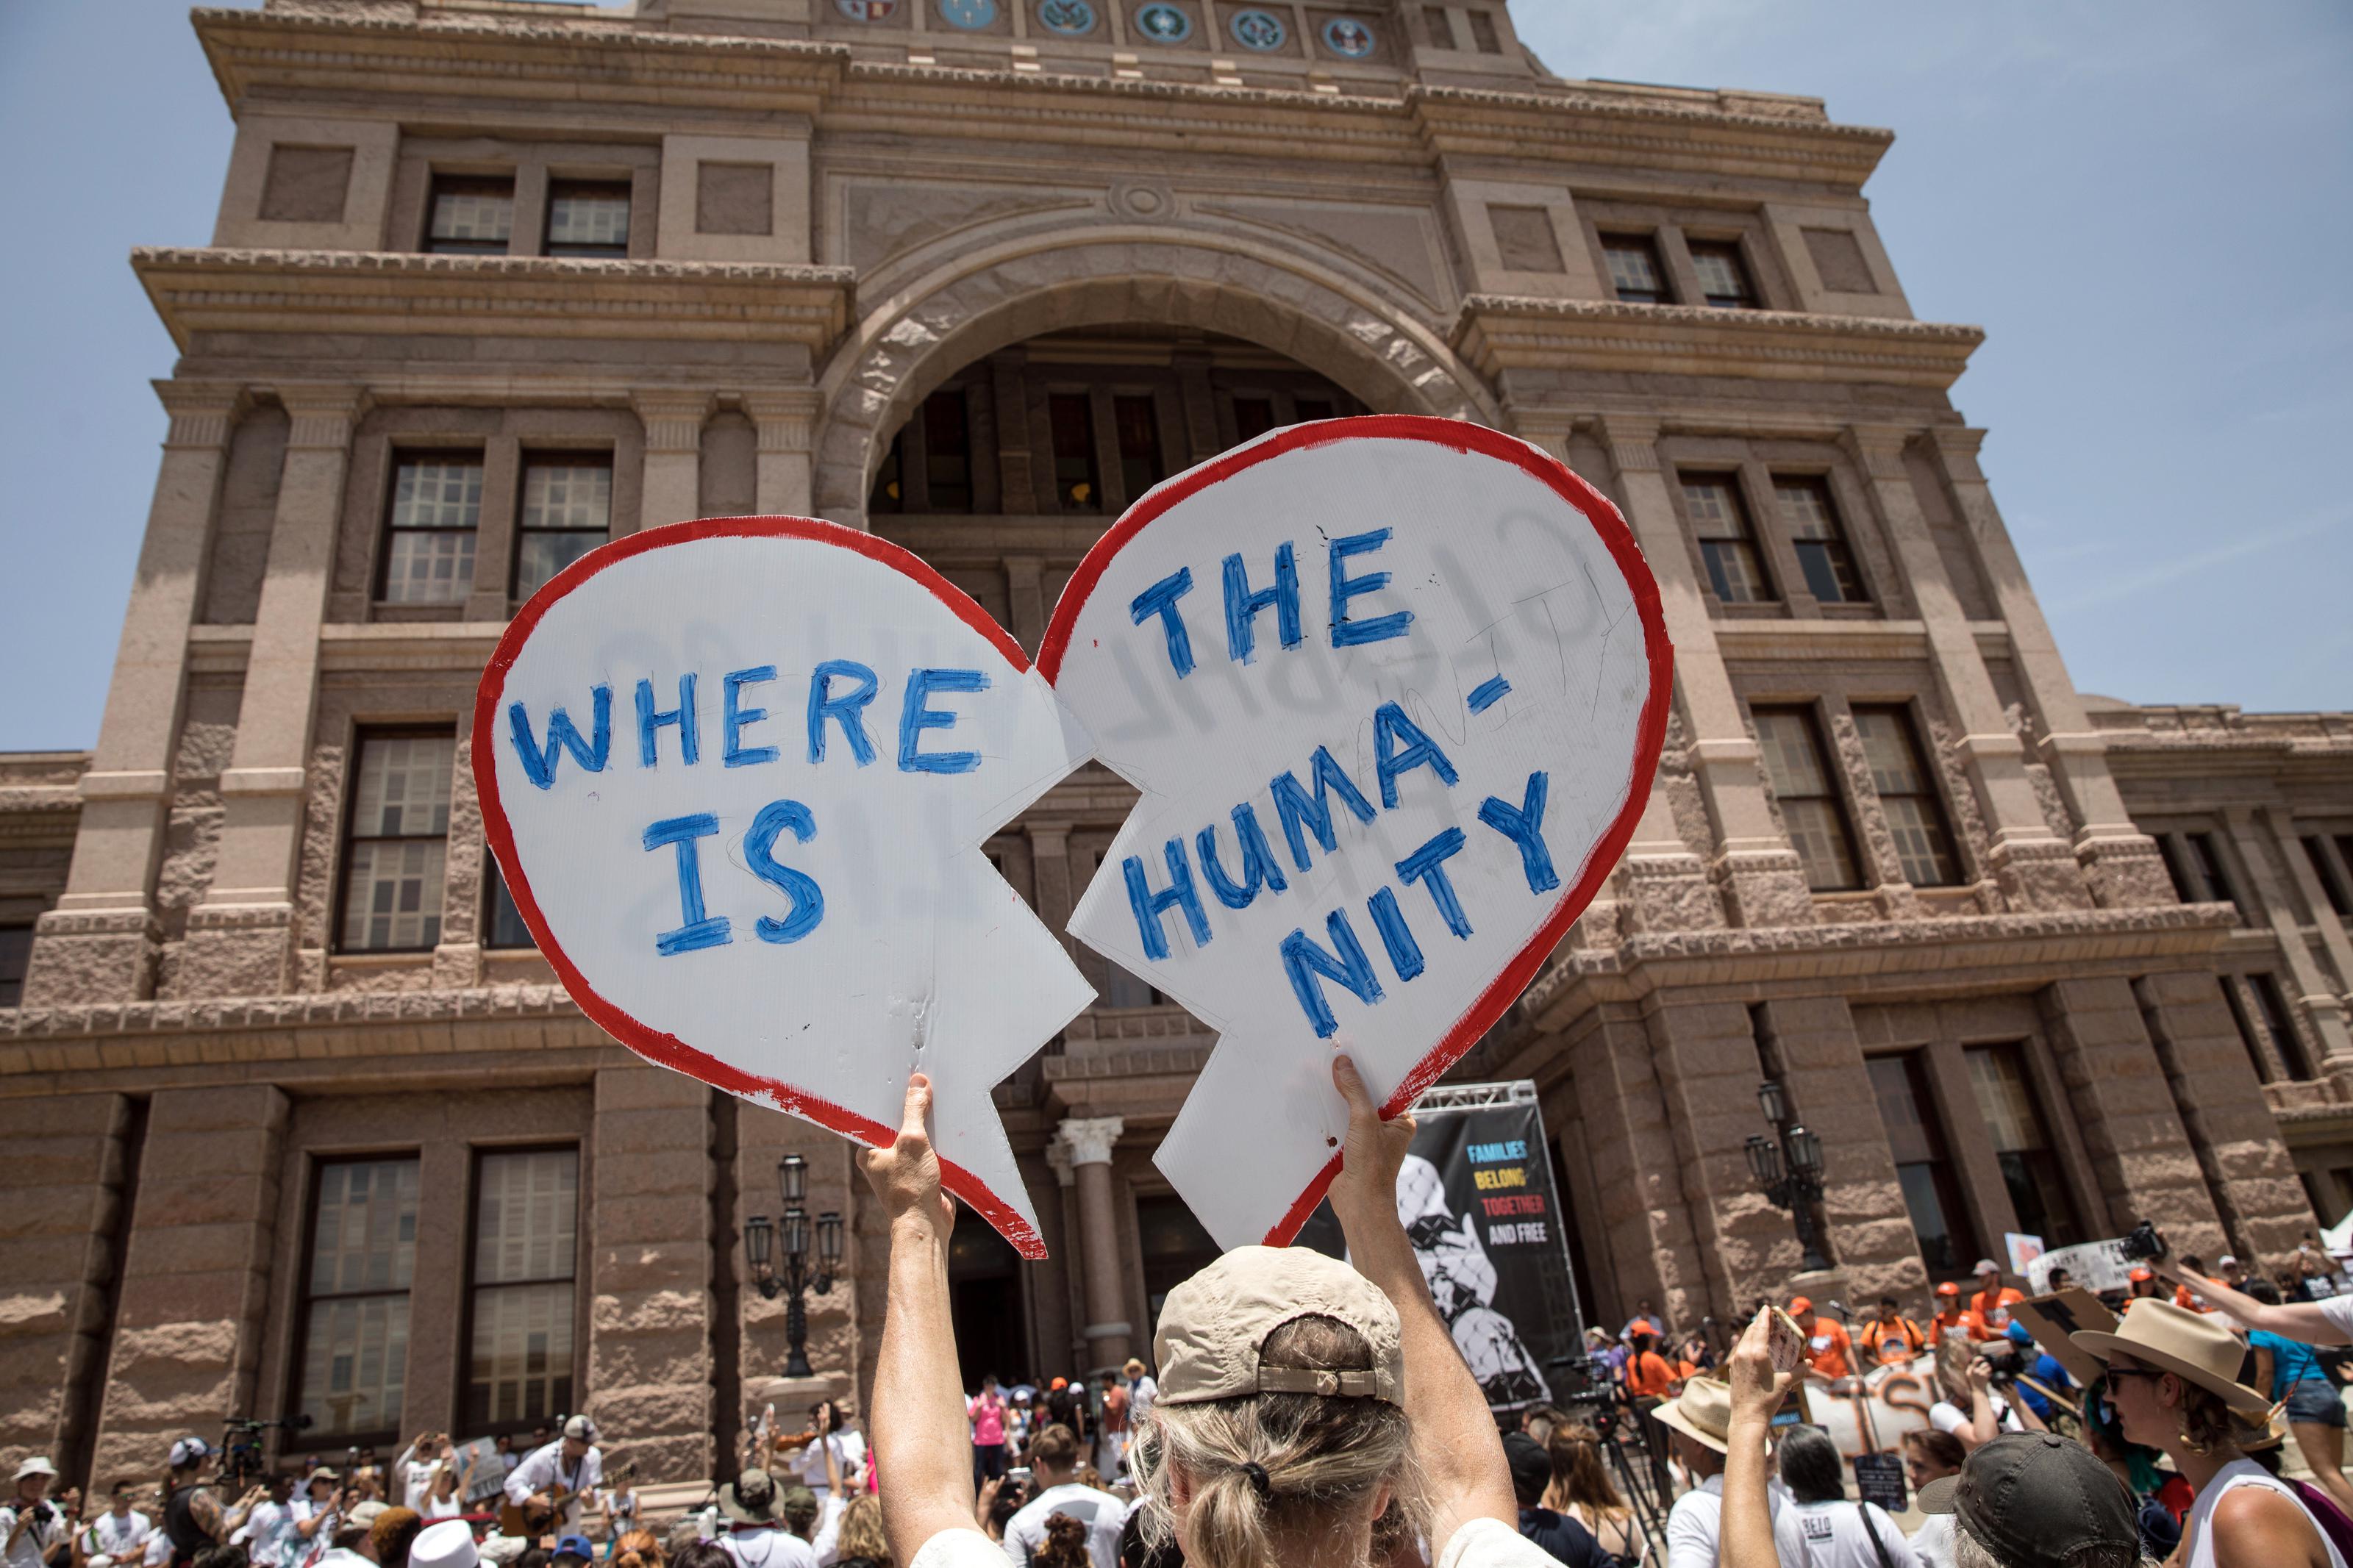 A demonstrator holds up a protest sign during a rally against the Trump administration's immigration policies outside of the Texas Capitol in Austin, Texas, on June 30, 2018.